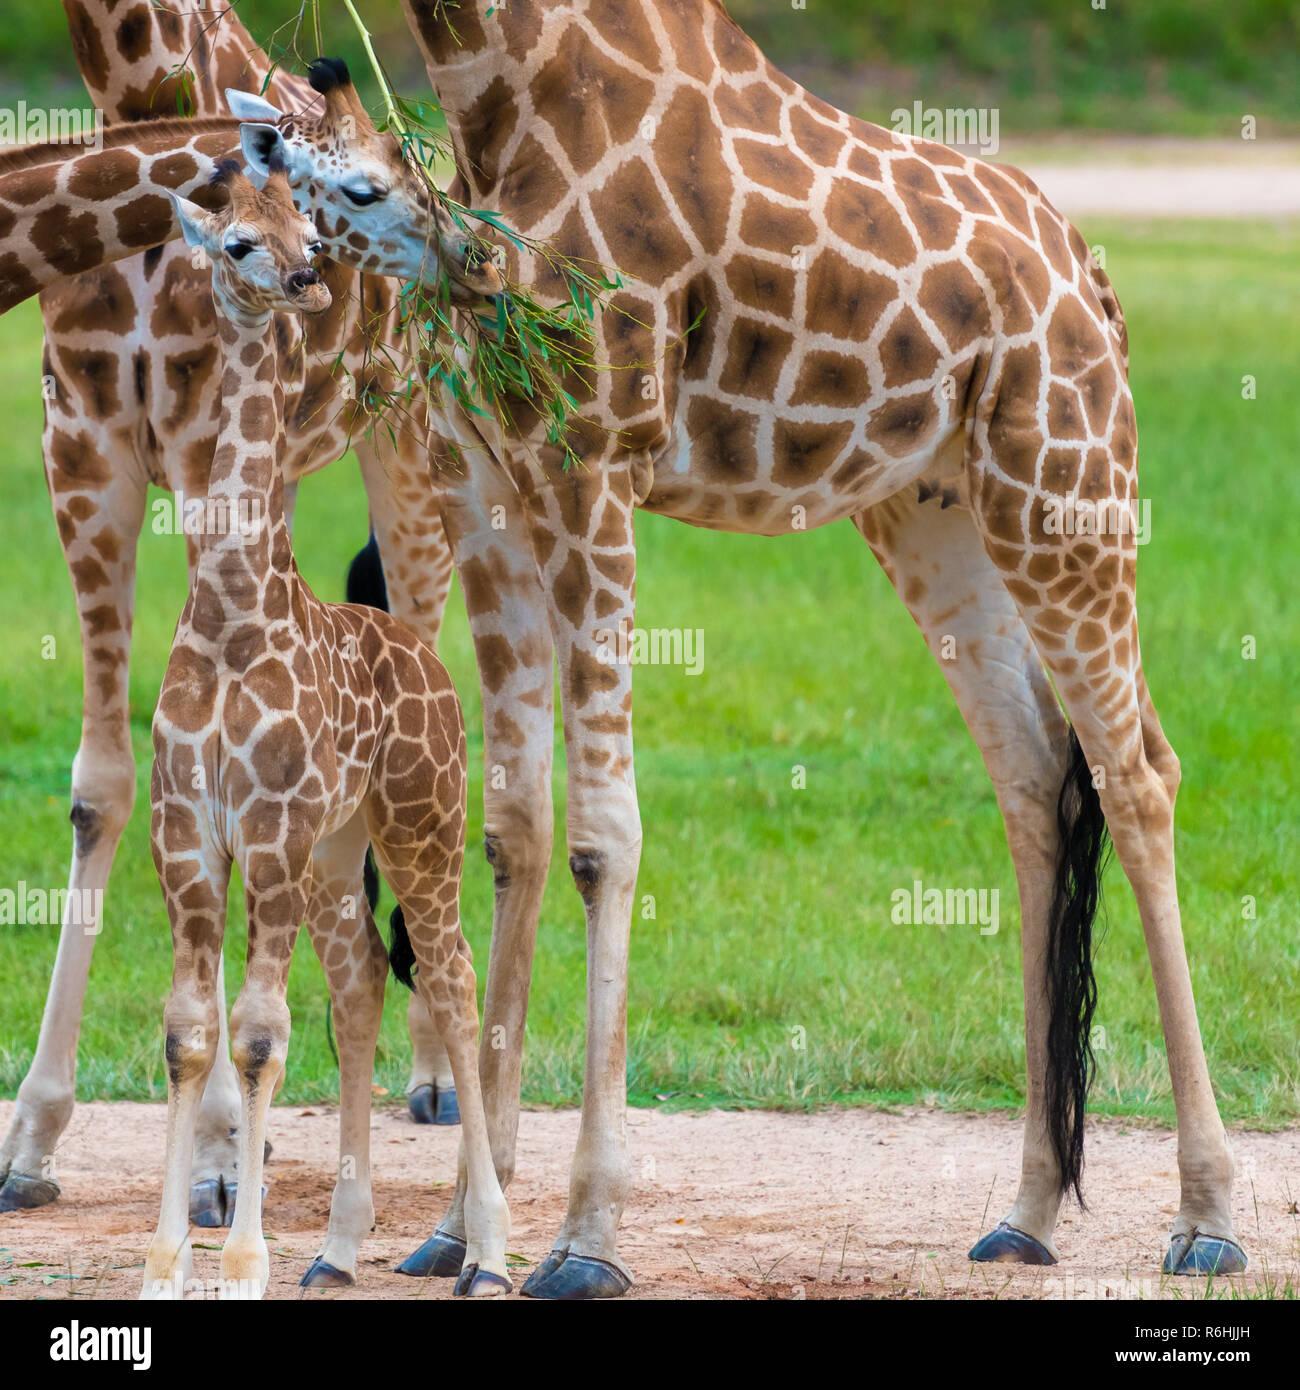 Young baby giraffe with its mother, African native animals Stock Photo